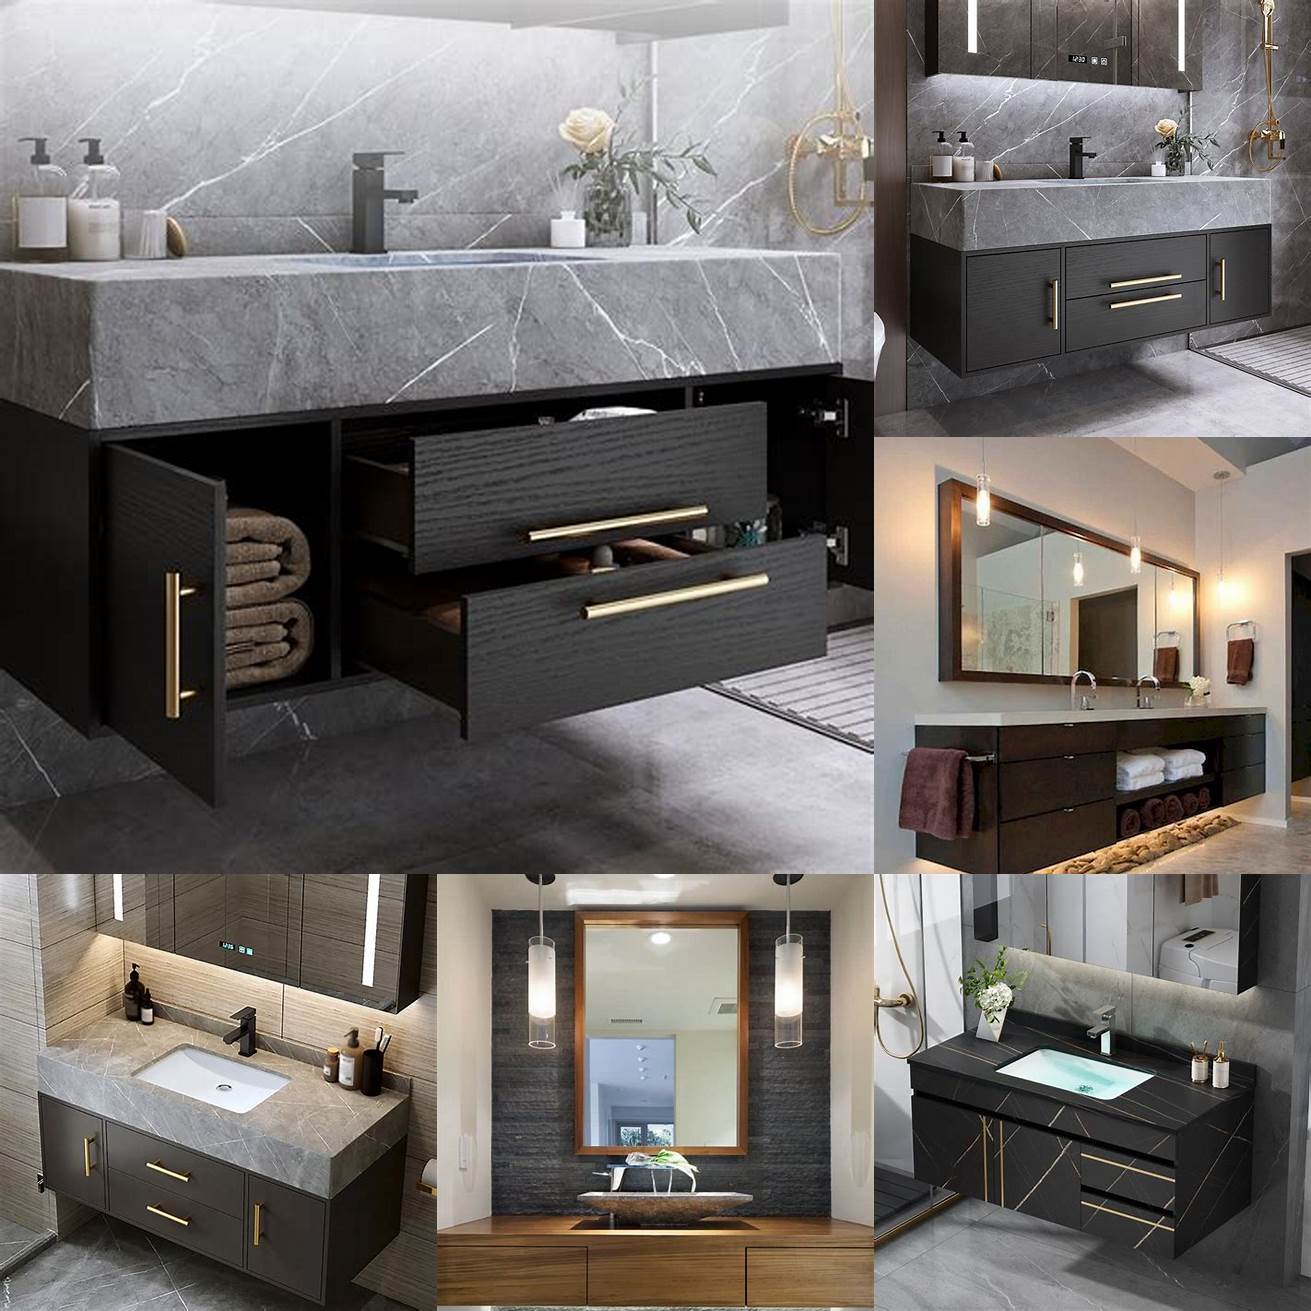 A contemporary modular bathroom vanity with floating cabinets a black granite countertop and integrated LED lighting